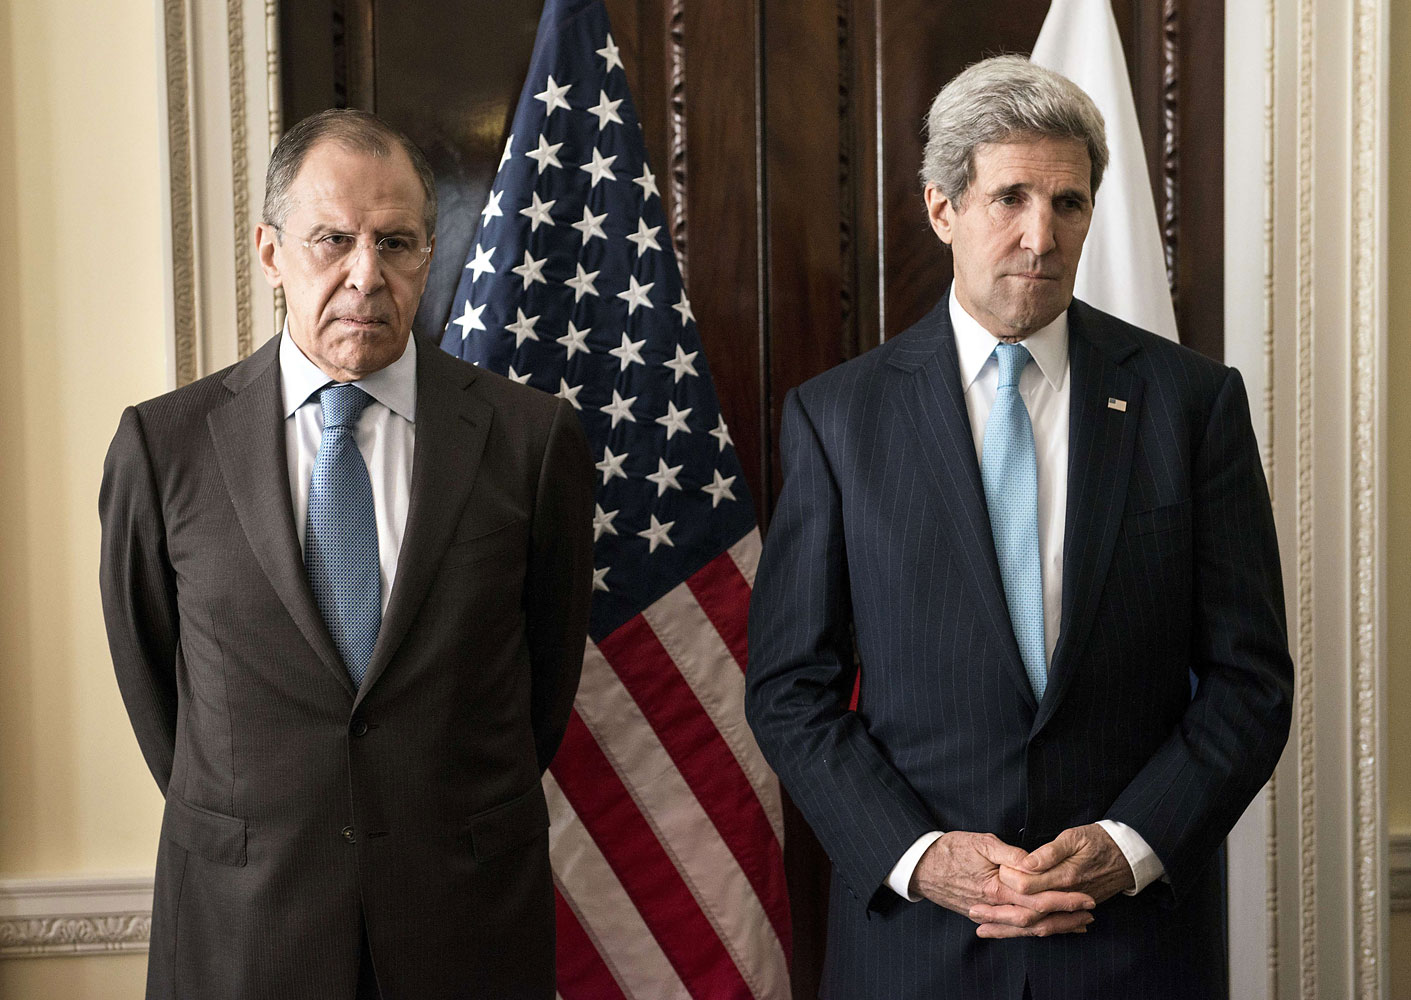 Russian Foreign Minister Sergey Lavrov (L) and US Secretary of State John Kerry stand together before a meeting at Winfield House in London on March 14, 2014. (Brendan Smialowski—AFP/Getty Images)